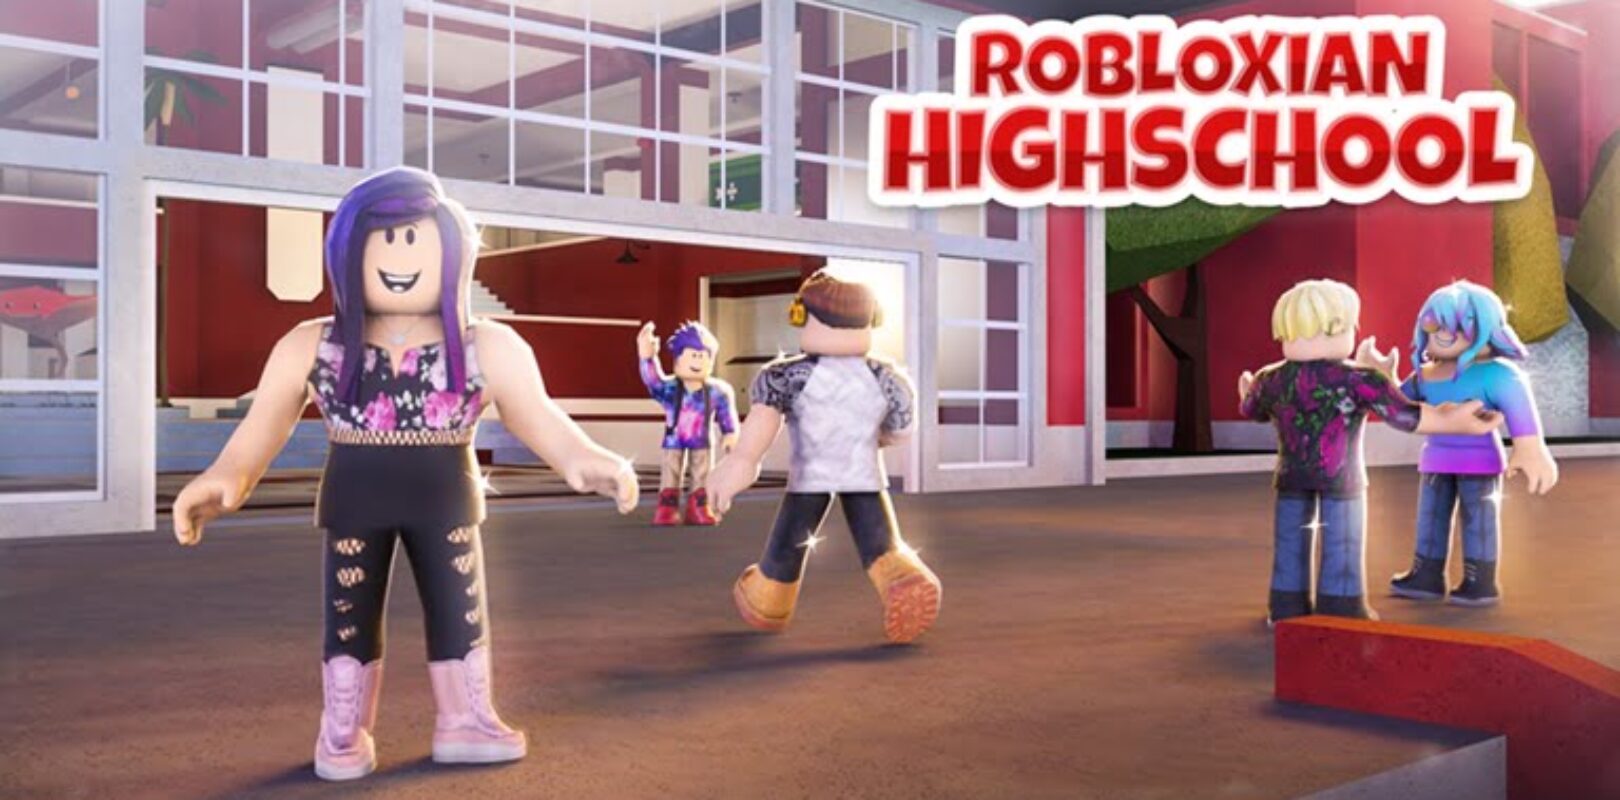 pictures of robloxians fighting